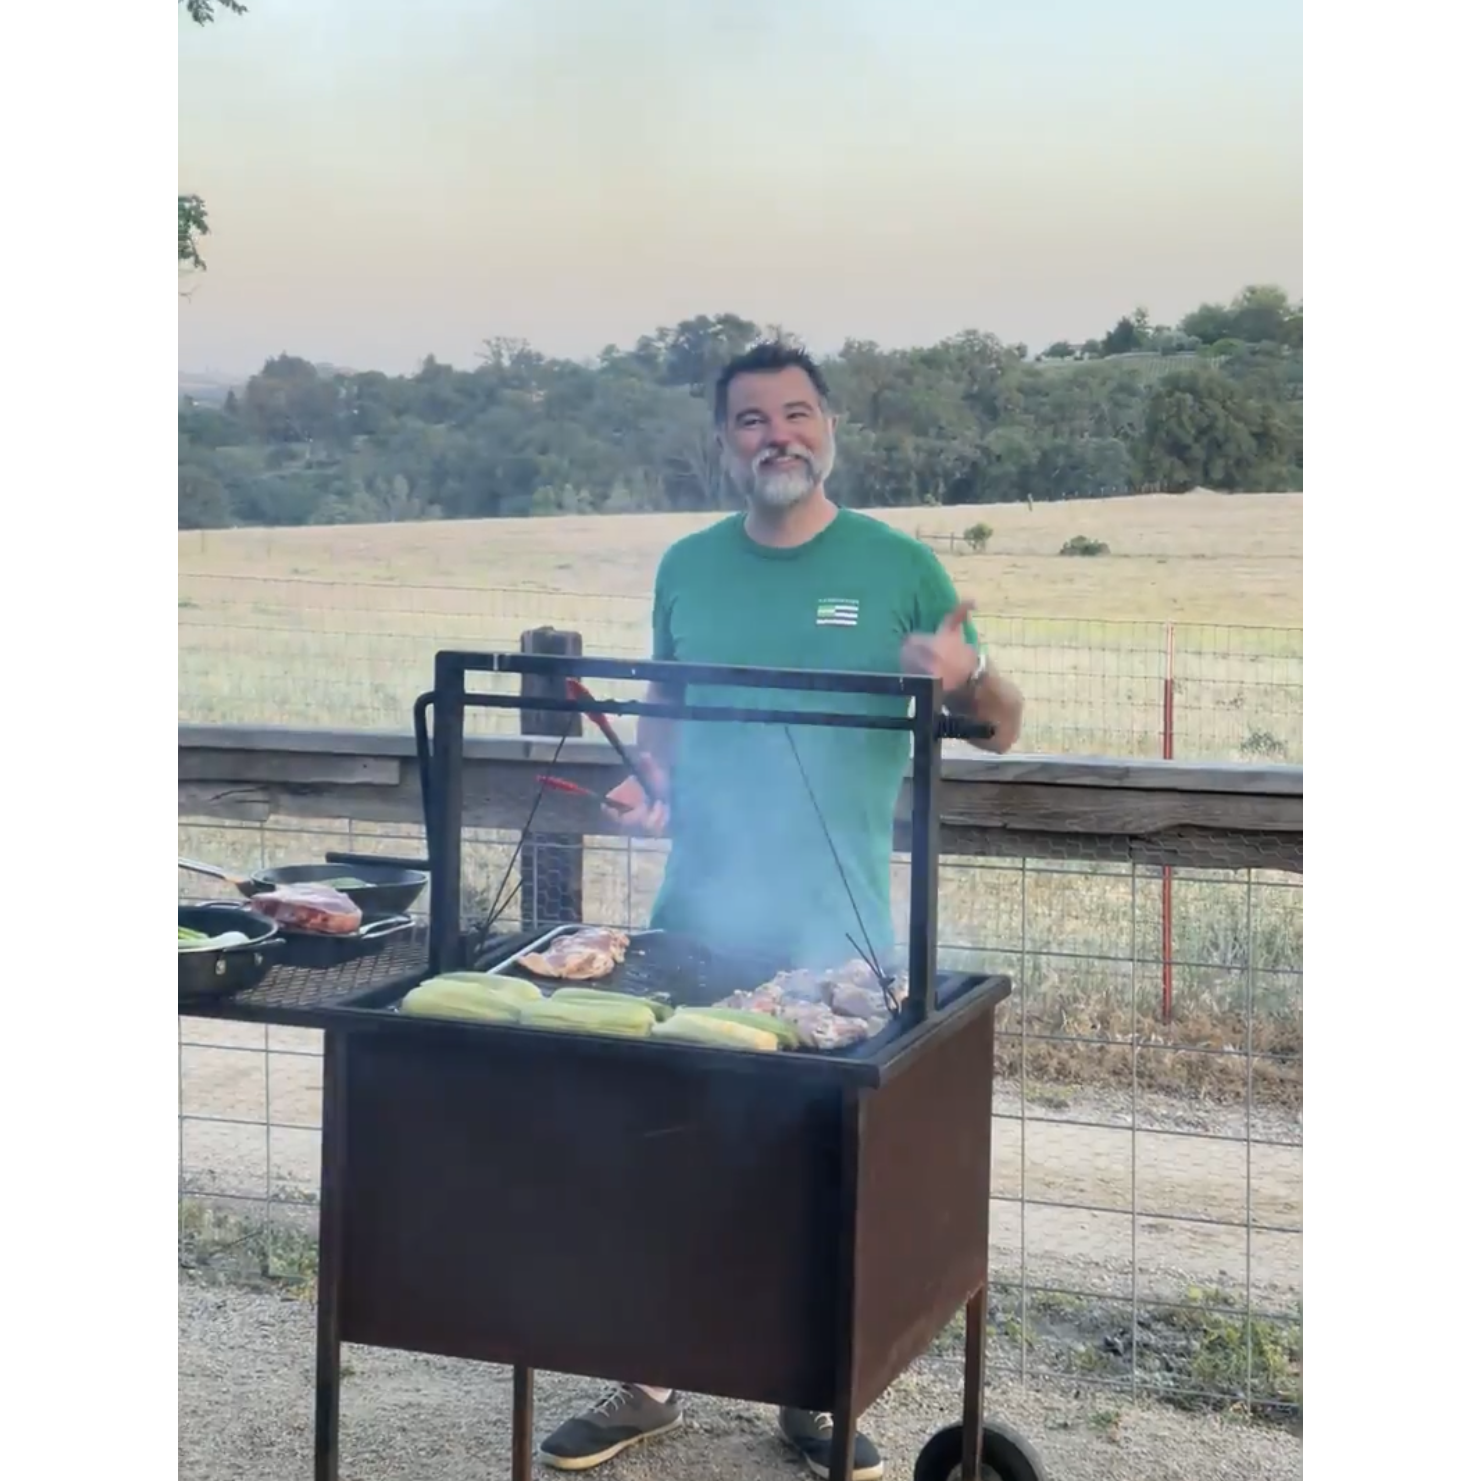 One of Kevin's joy around a grill. Look at that smile.